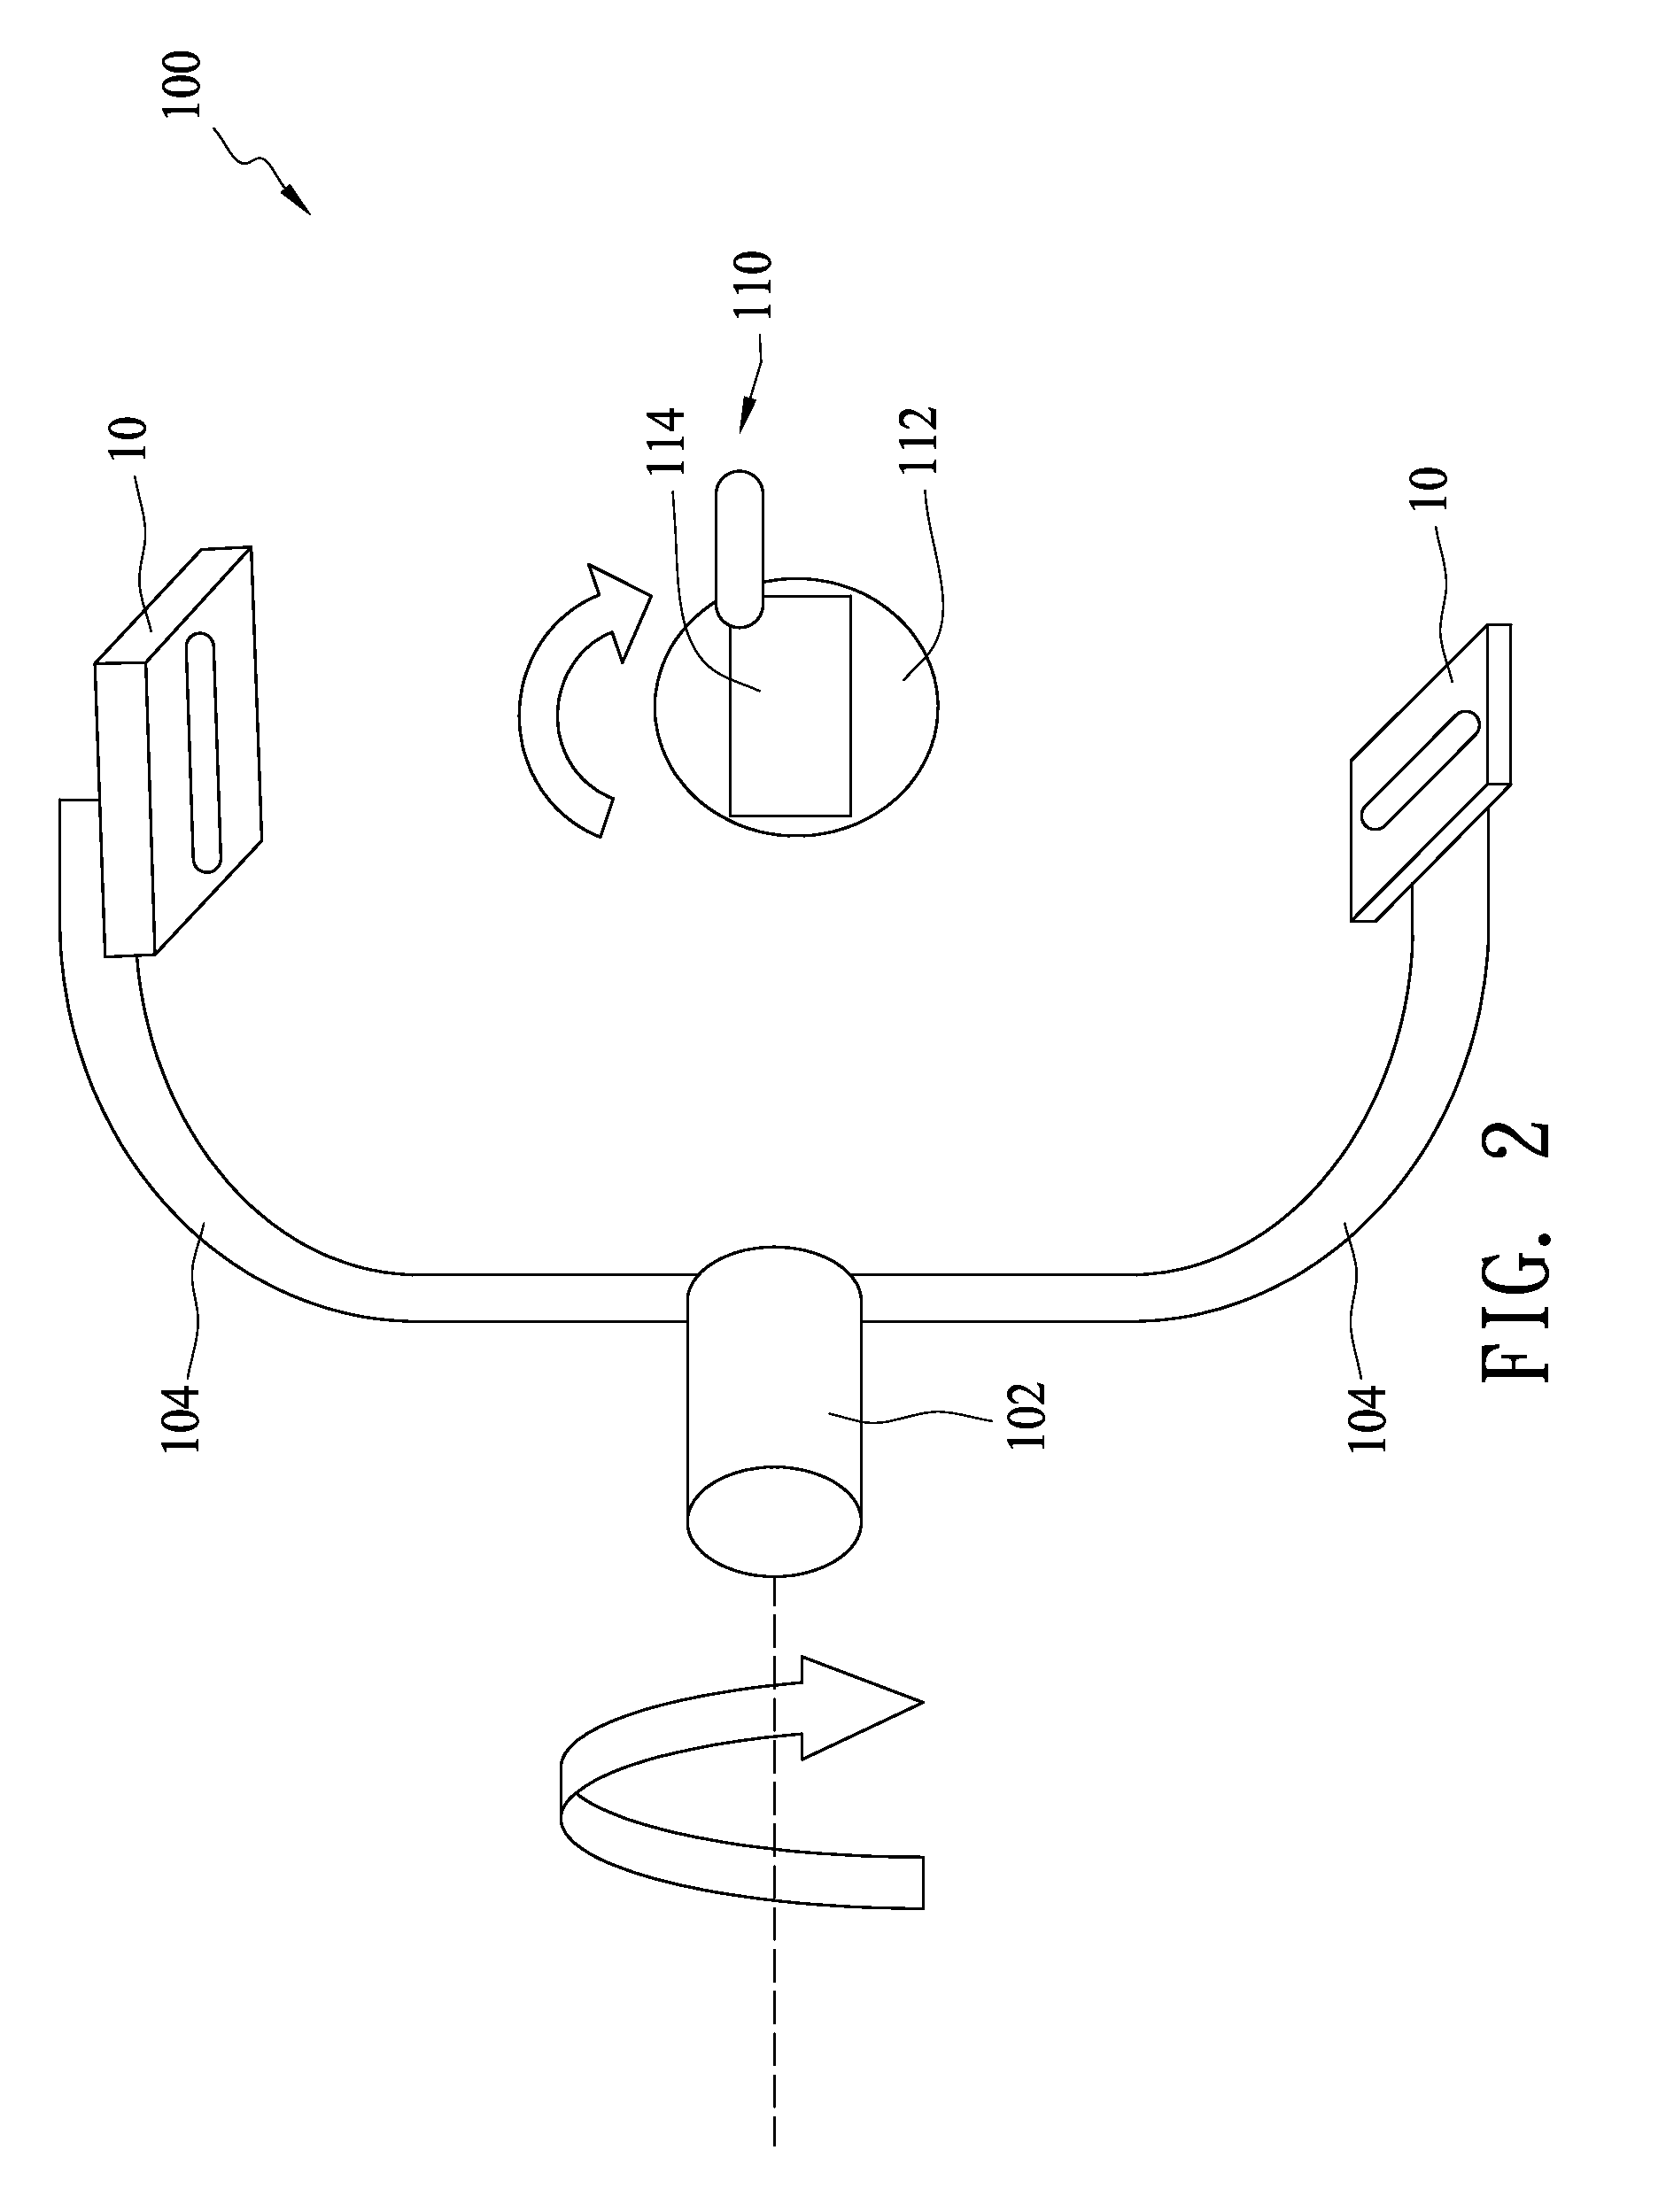 Optoelectronic System for Sensing an Electromagnetic Field at Total Solid Angle